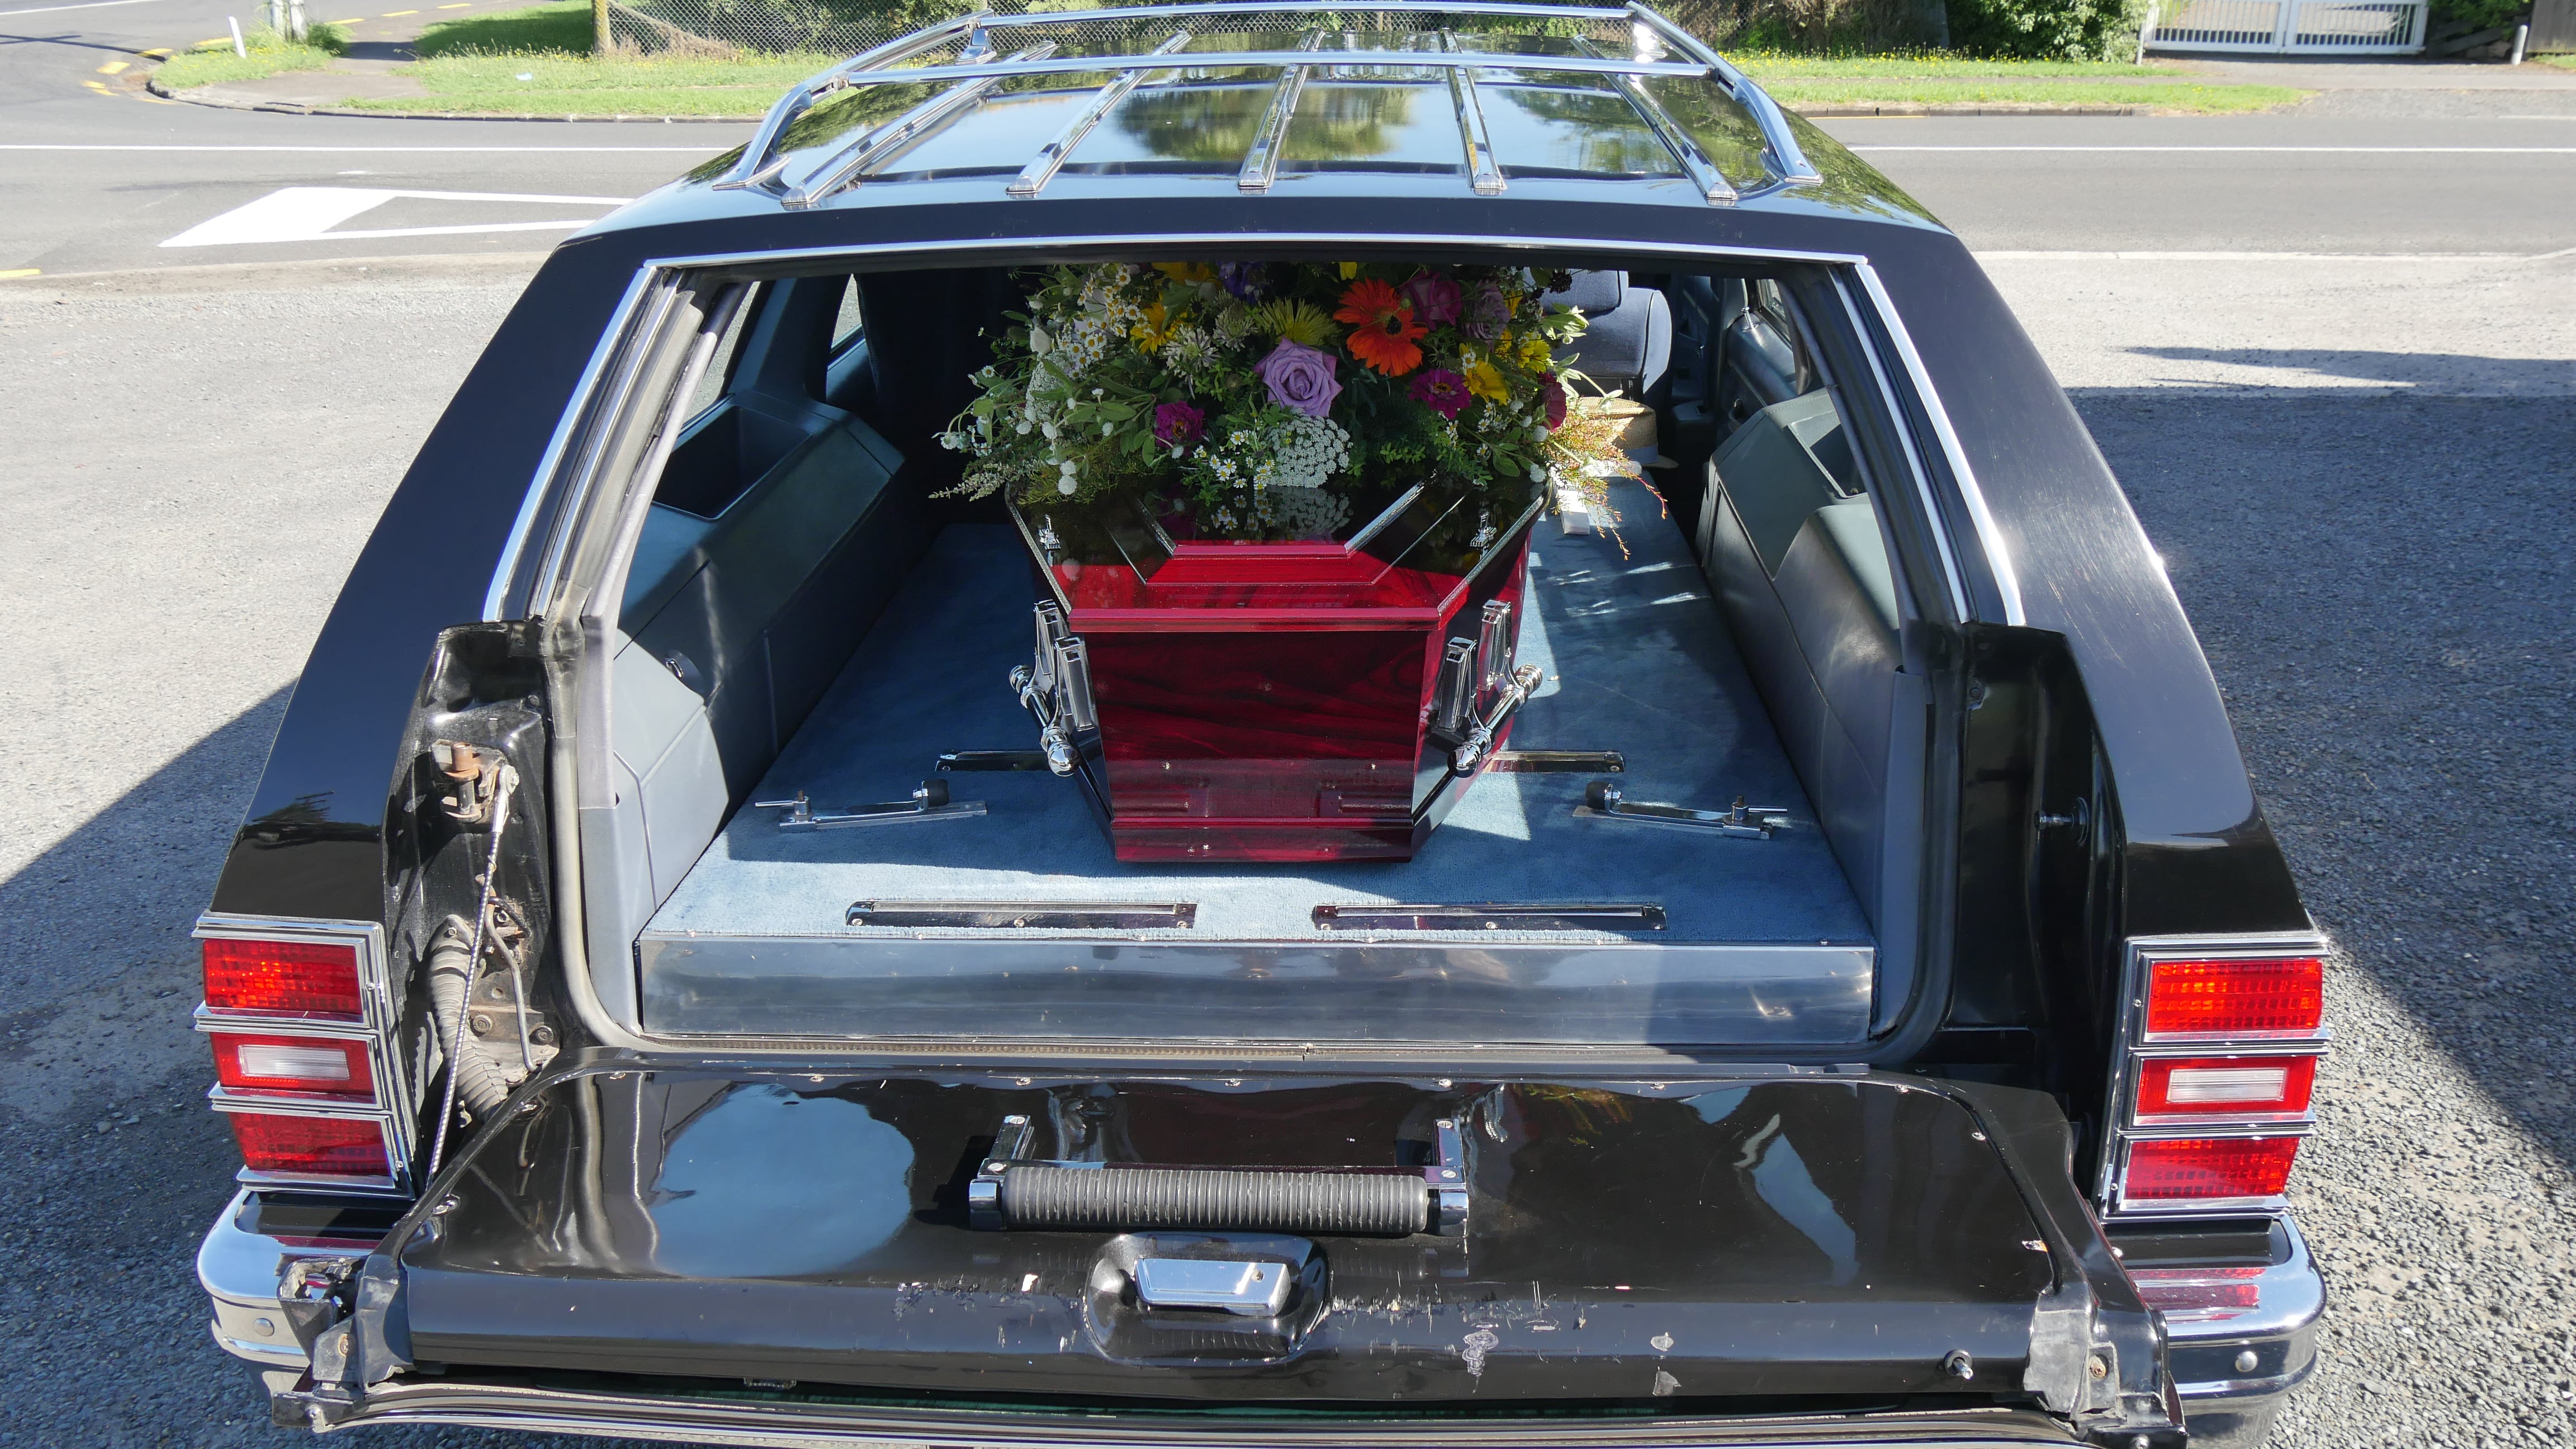 Funeral hearse with colorful flowers above casket.